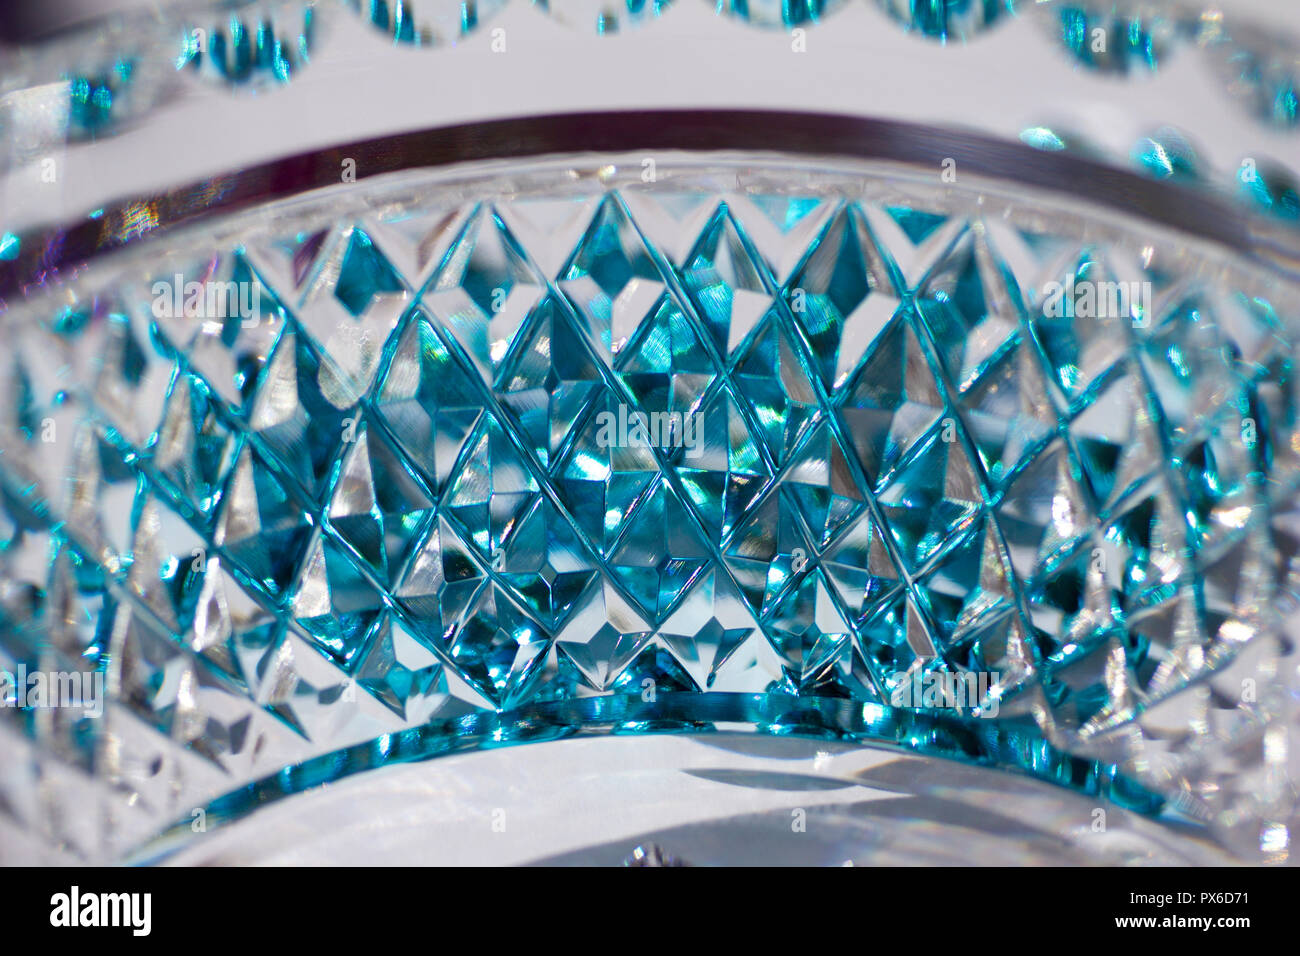 Macro background view of beautiful lead crystal glass with hand-cut diamond  pattern facets reflecting brilliant aqua blue color Stock Photo - Alamy